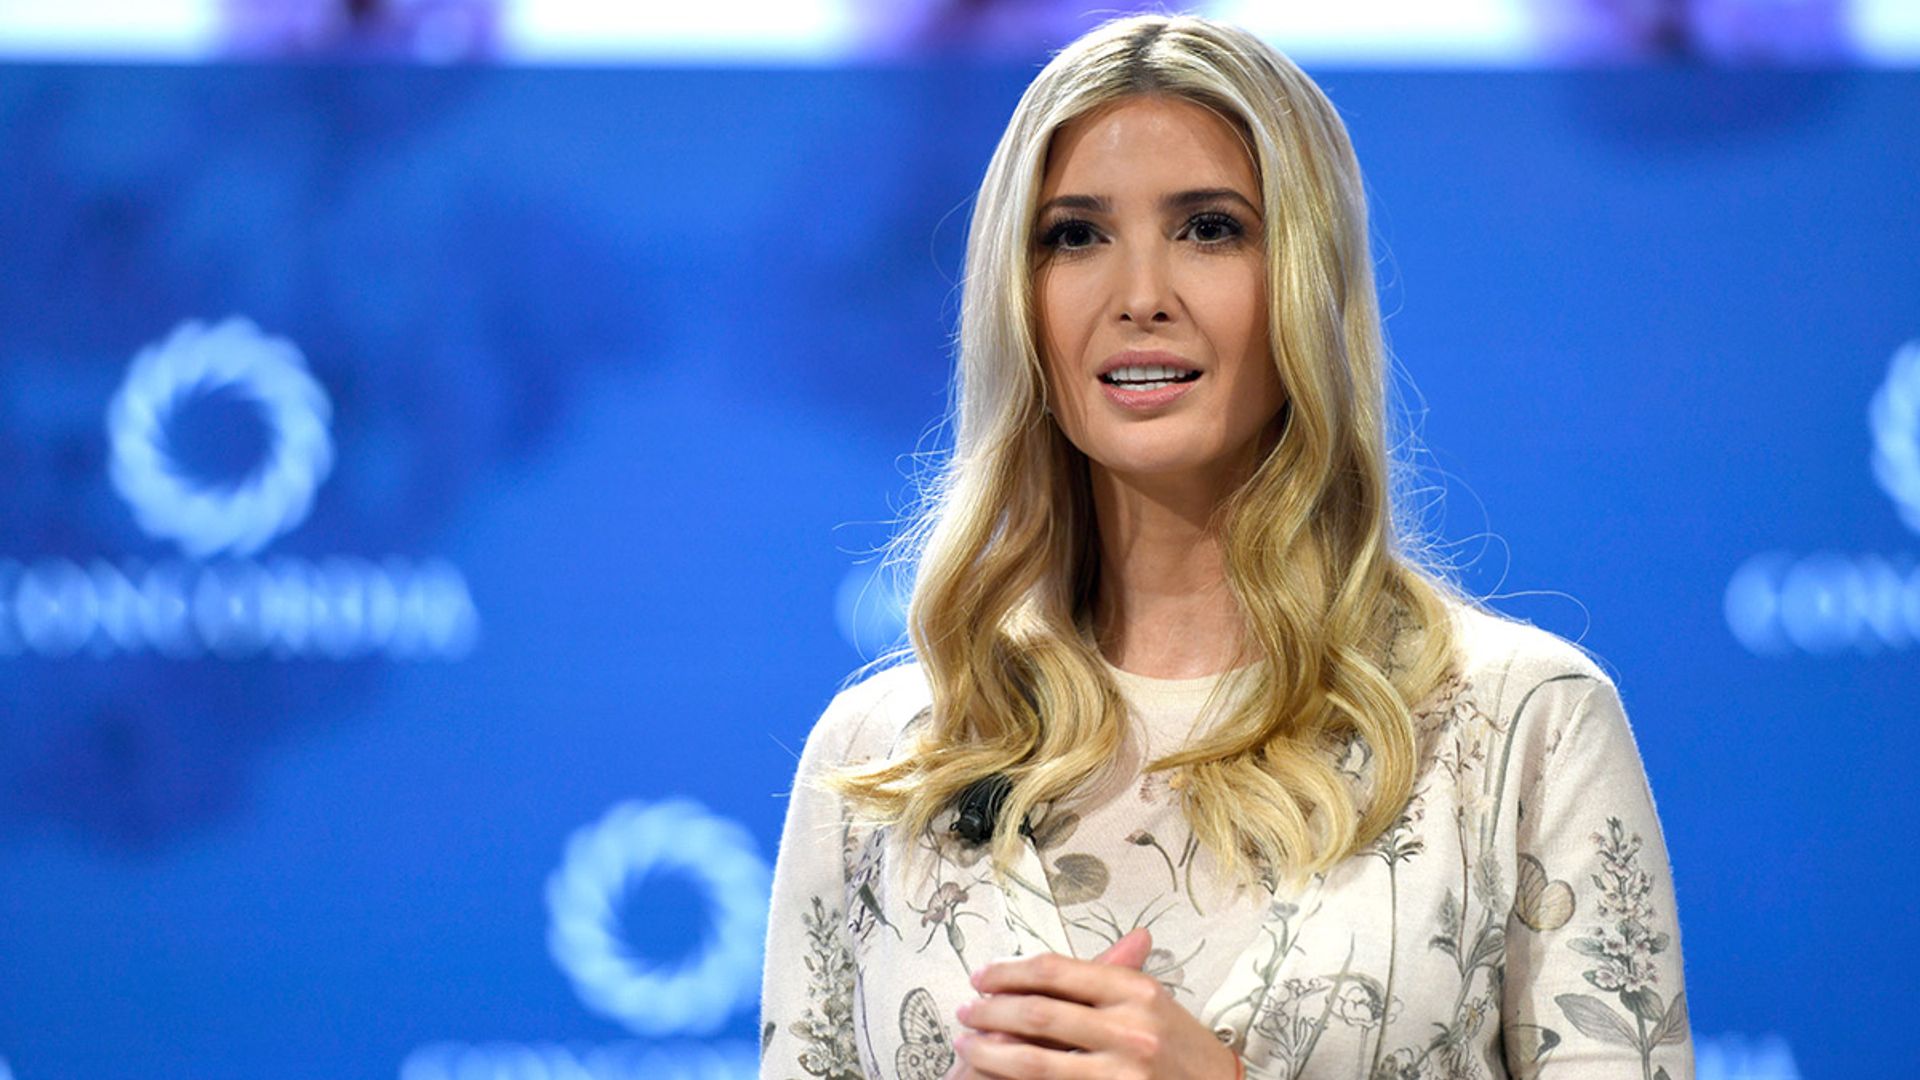 Ivanka Trump divides followers with her farewell post on Twitter